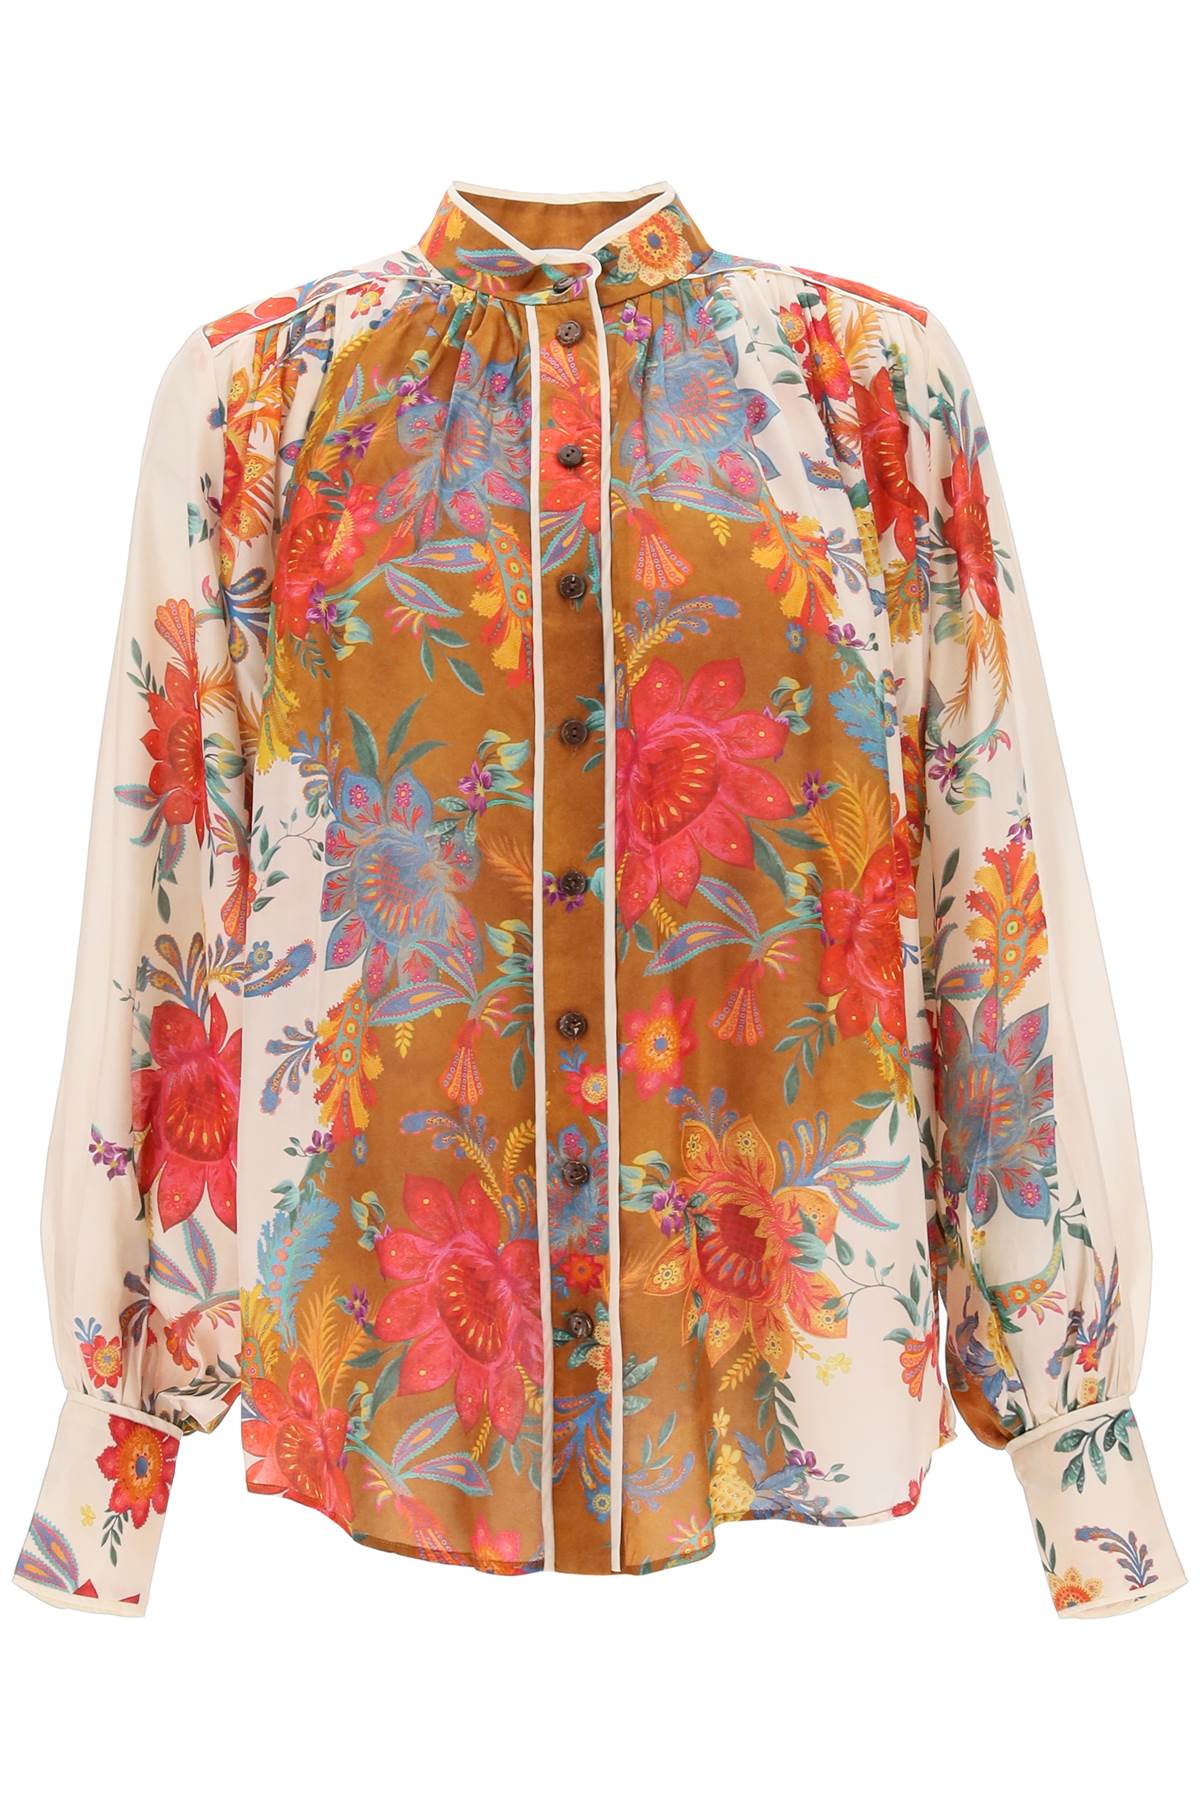 Zimmermann 'ginger' blouse with floral motif-0